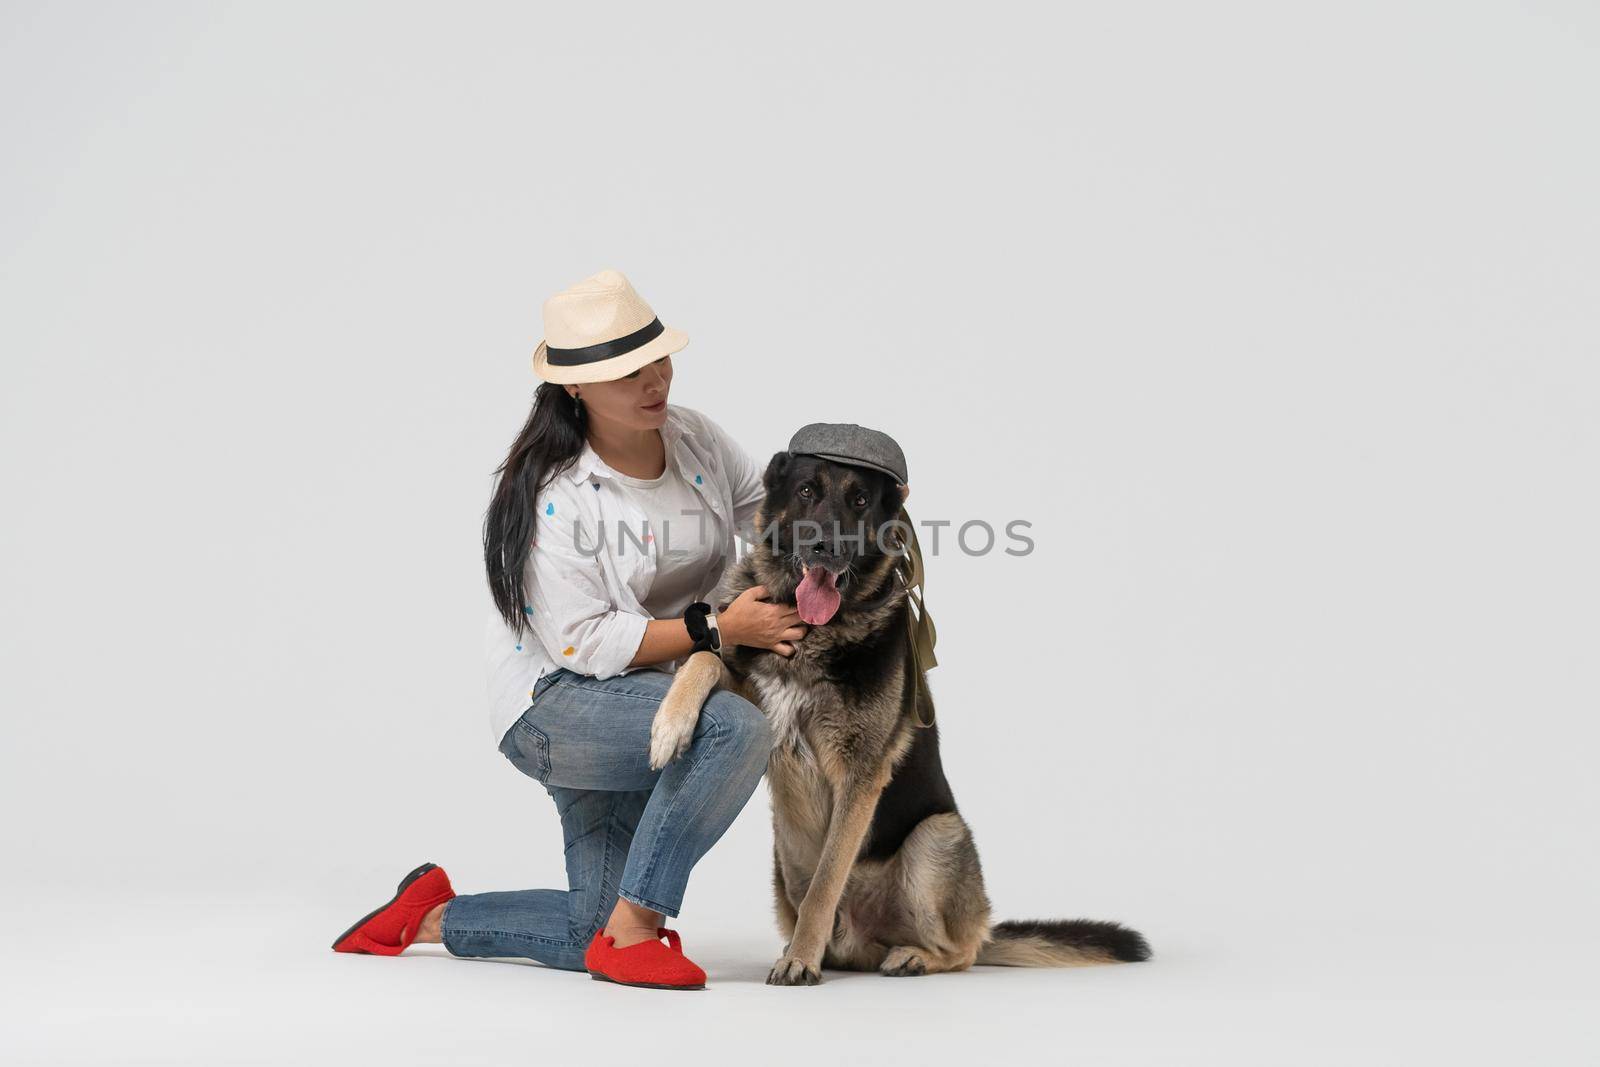 Woman in hat and Eastern European Shepherd wearing cap posing on white background. Pet concept.